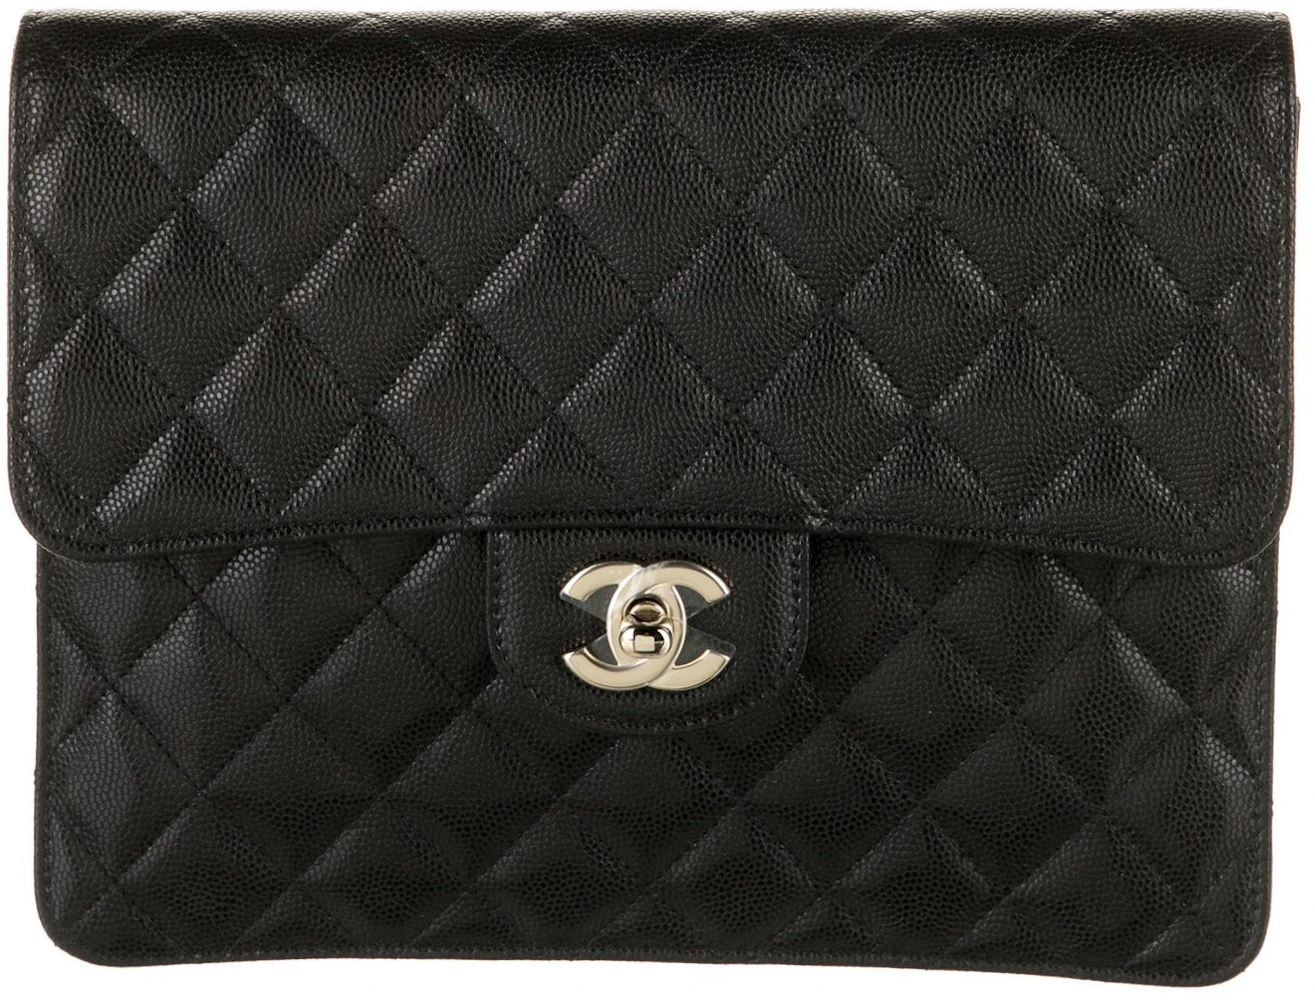 Chanel Quilted Caviar Flap Case Black Caviar in Leather with Gold